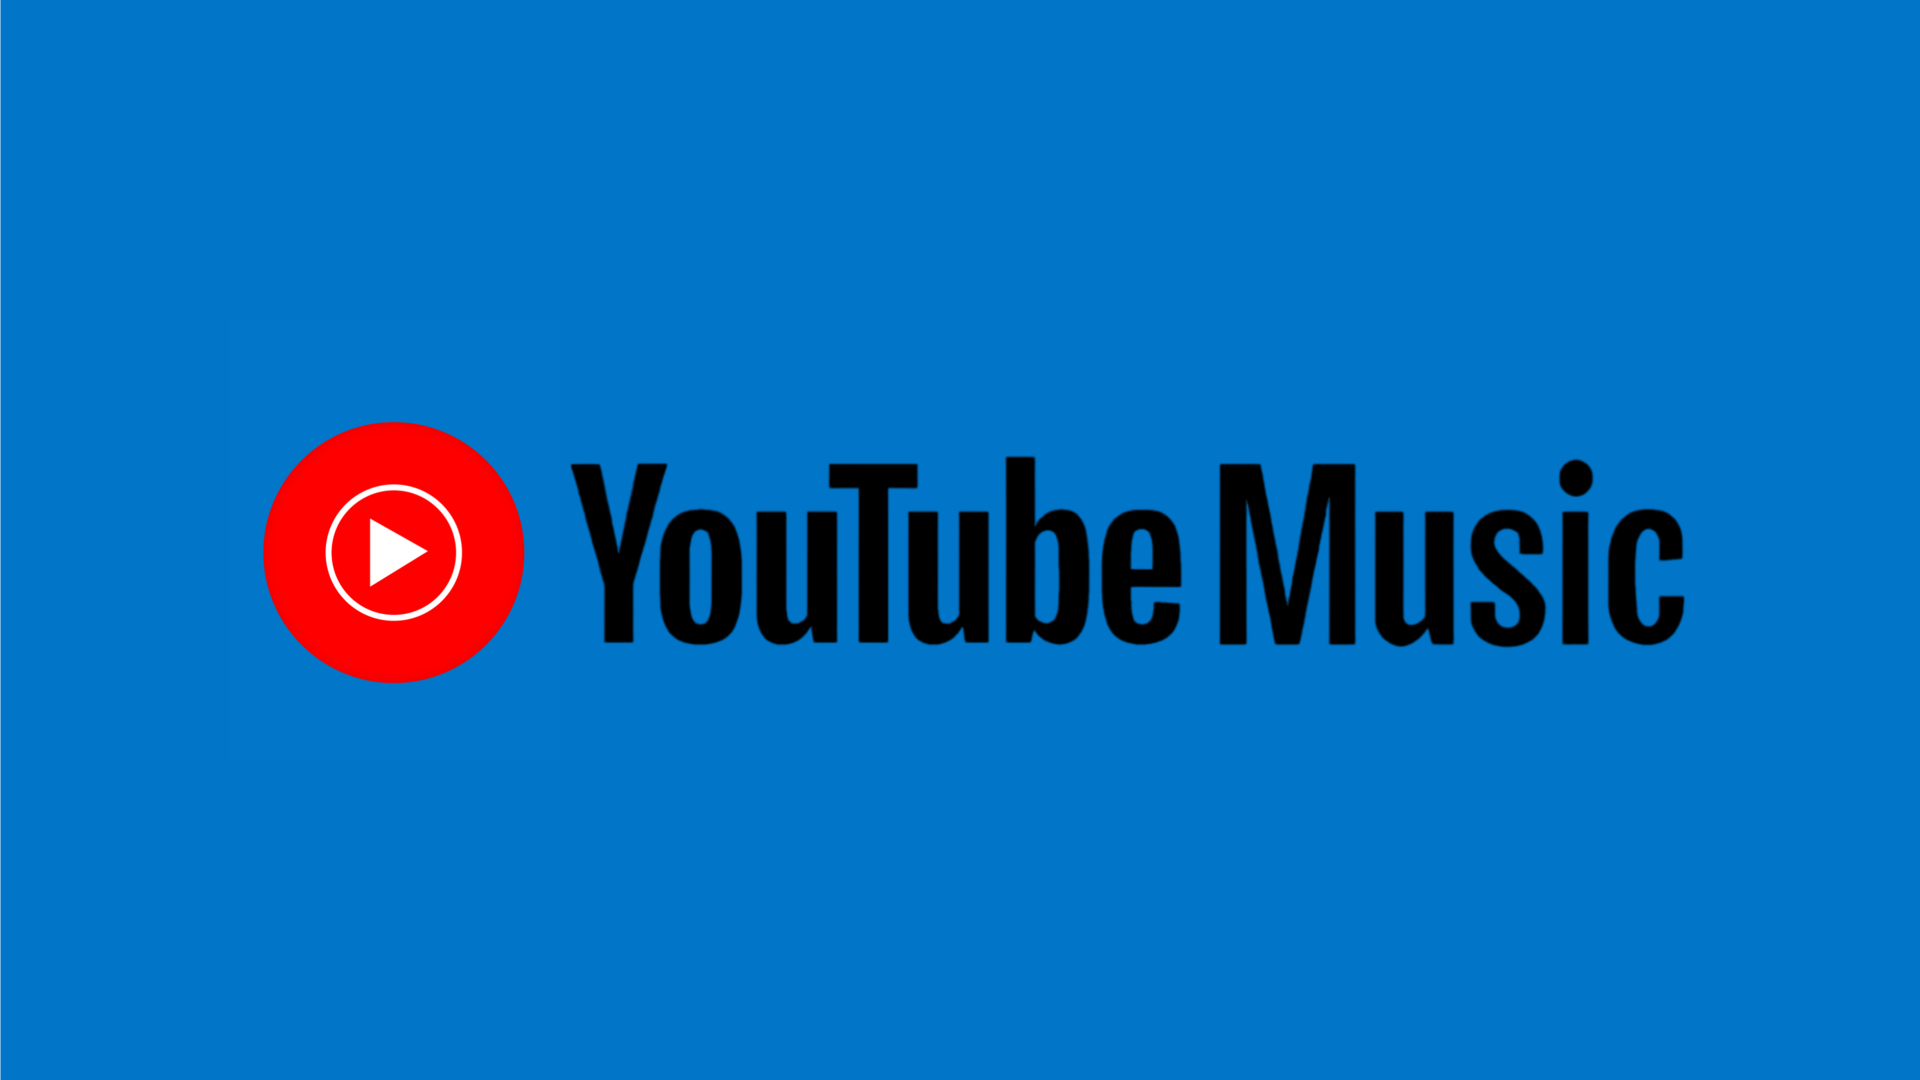 YouTube Music now offers real-time lyrics for songs